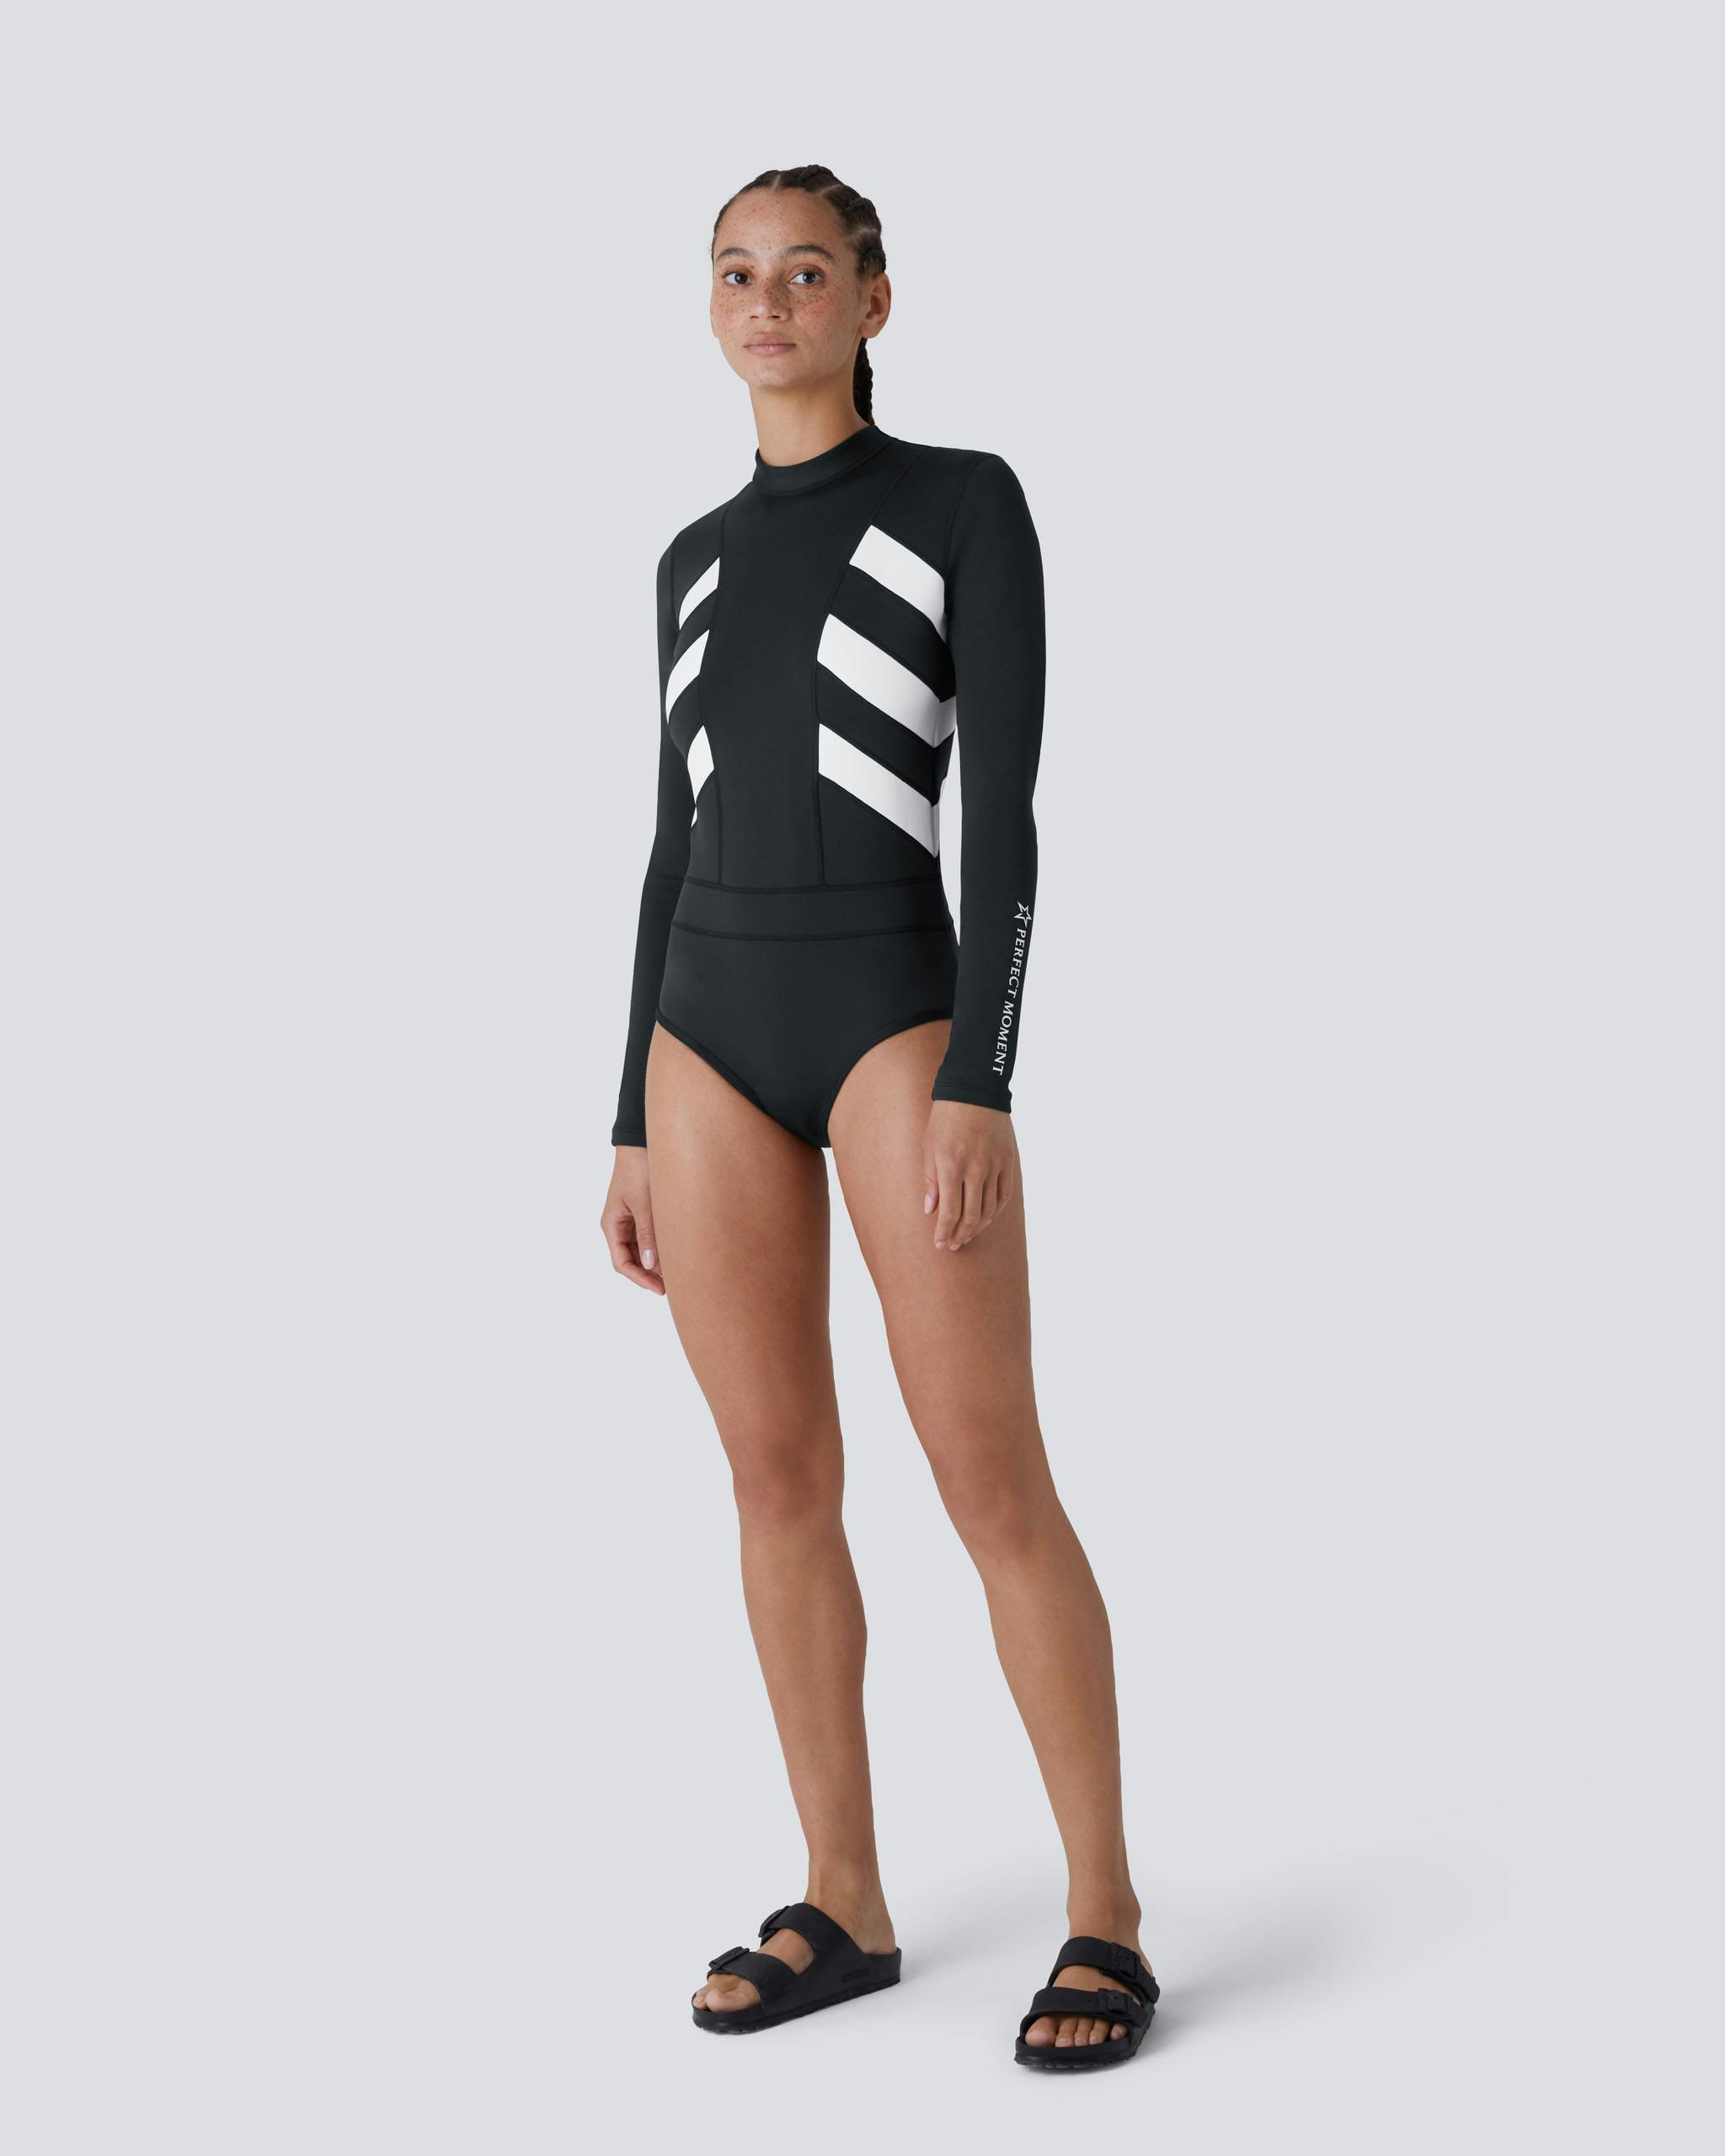 Imok Wetsuit 0